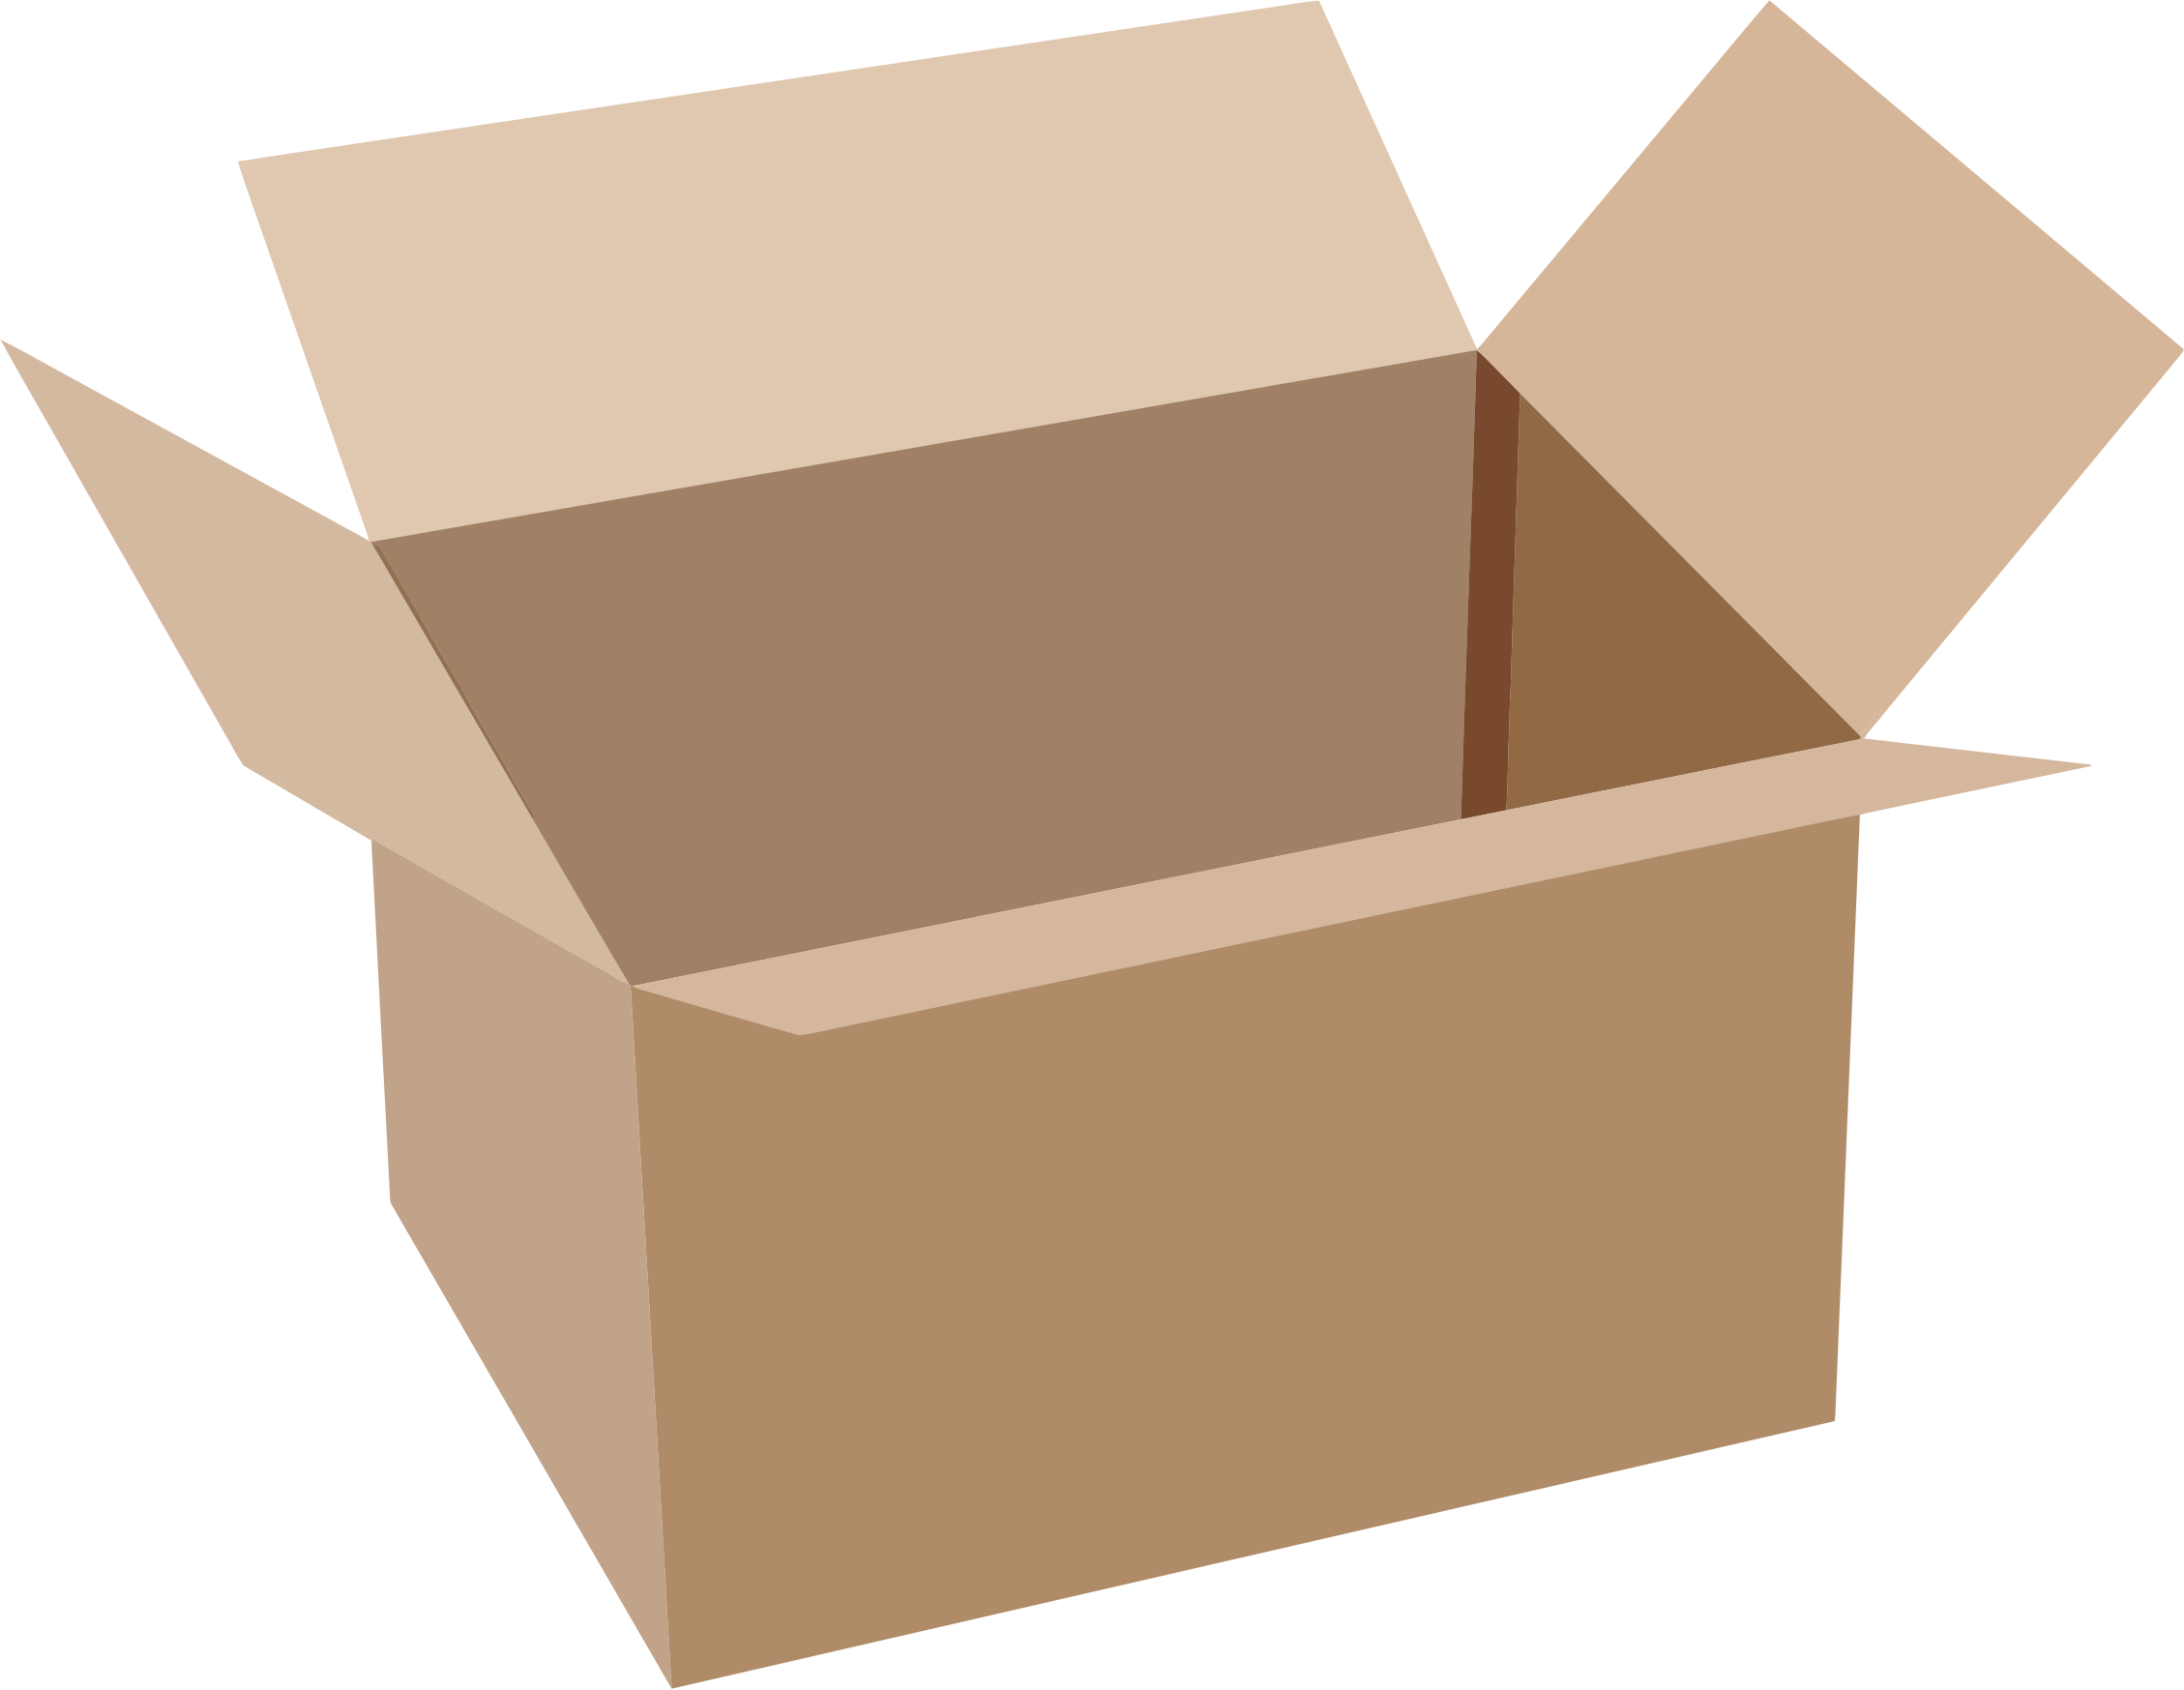 Download Box PNG, Package Box Carton, Square Box Clipart